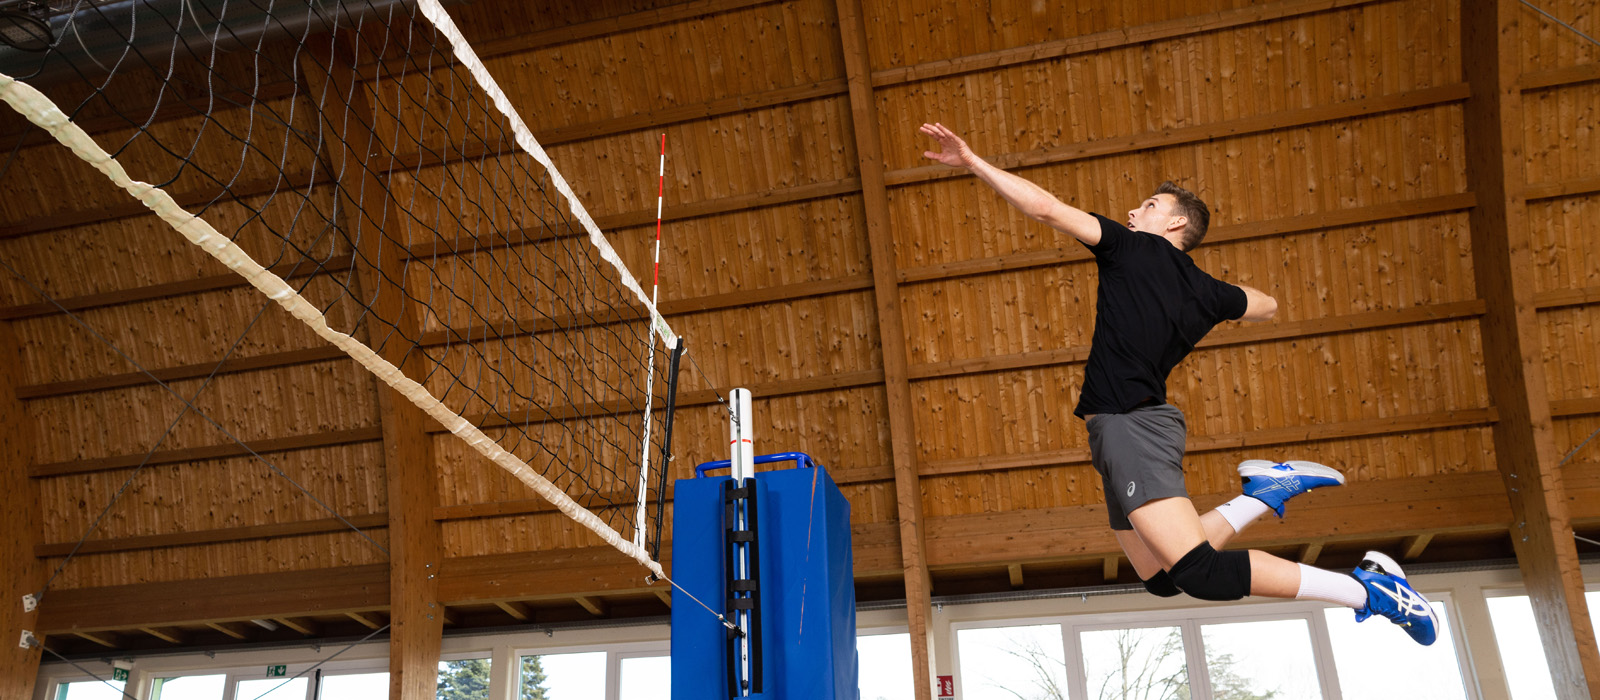 Man is jumping to reach the volleyball